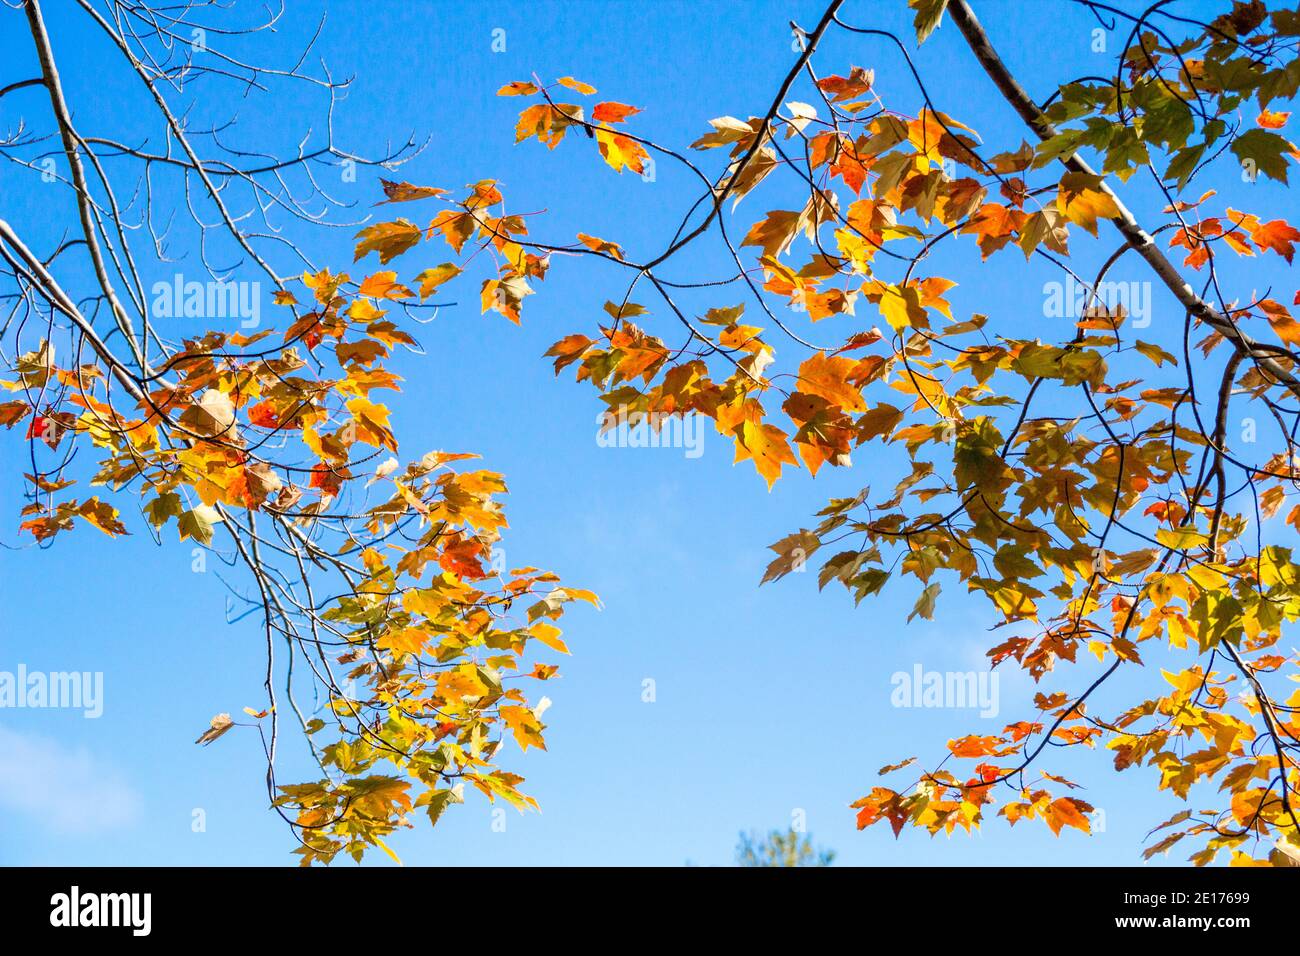 Autumn maple leaf background framed against a sunny blue sky in horizontal orientation. Stock Photo